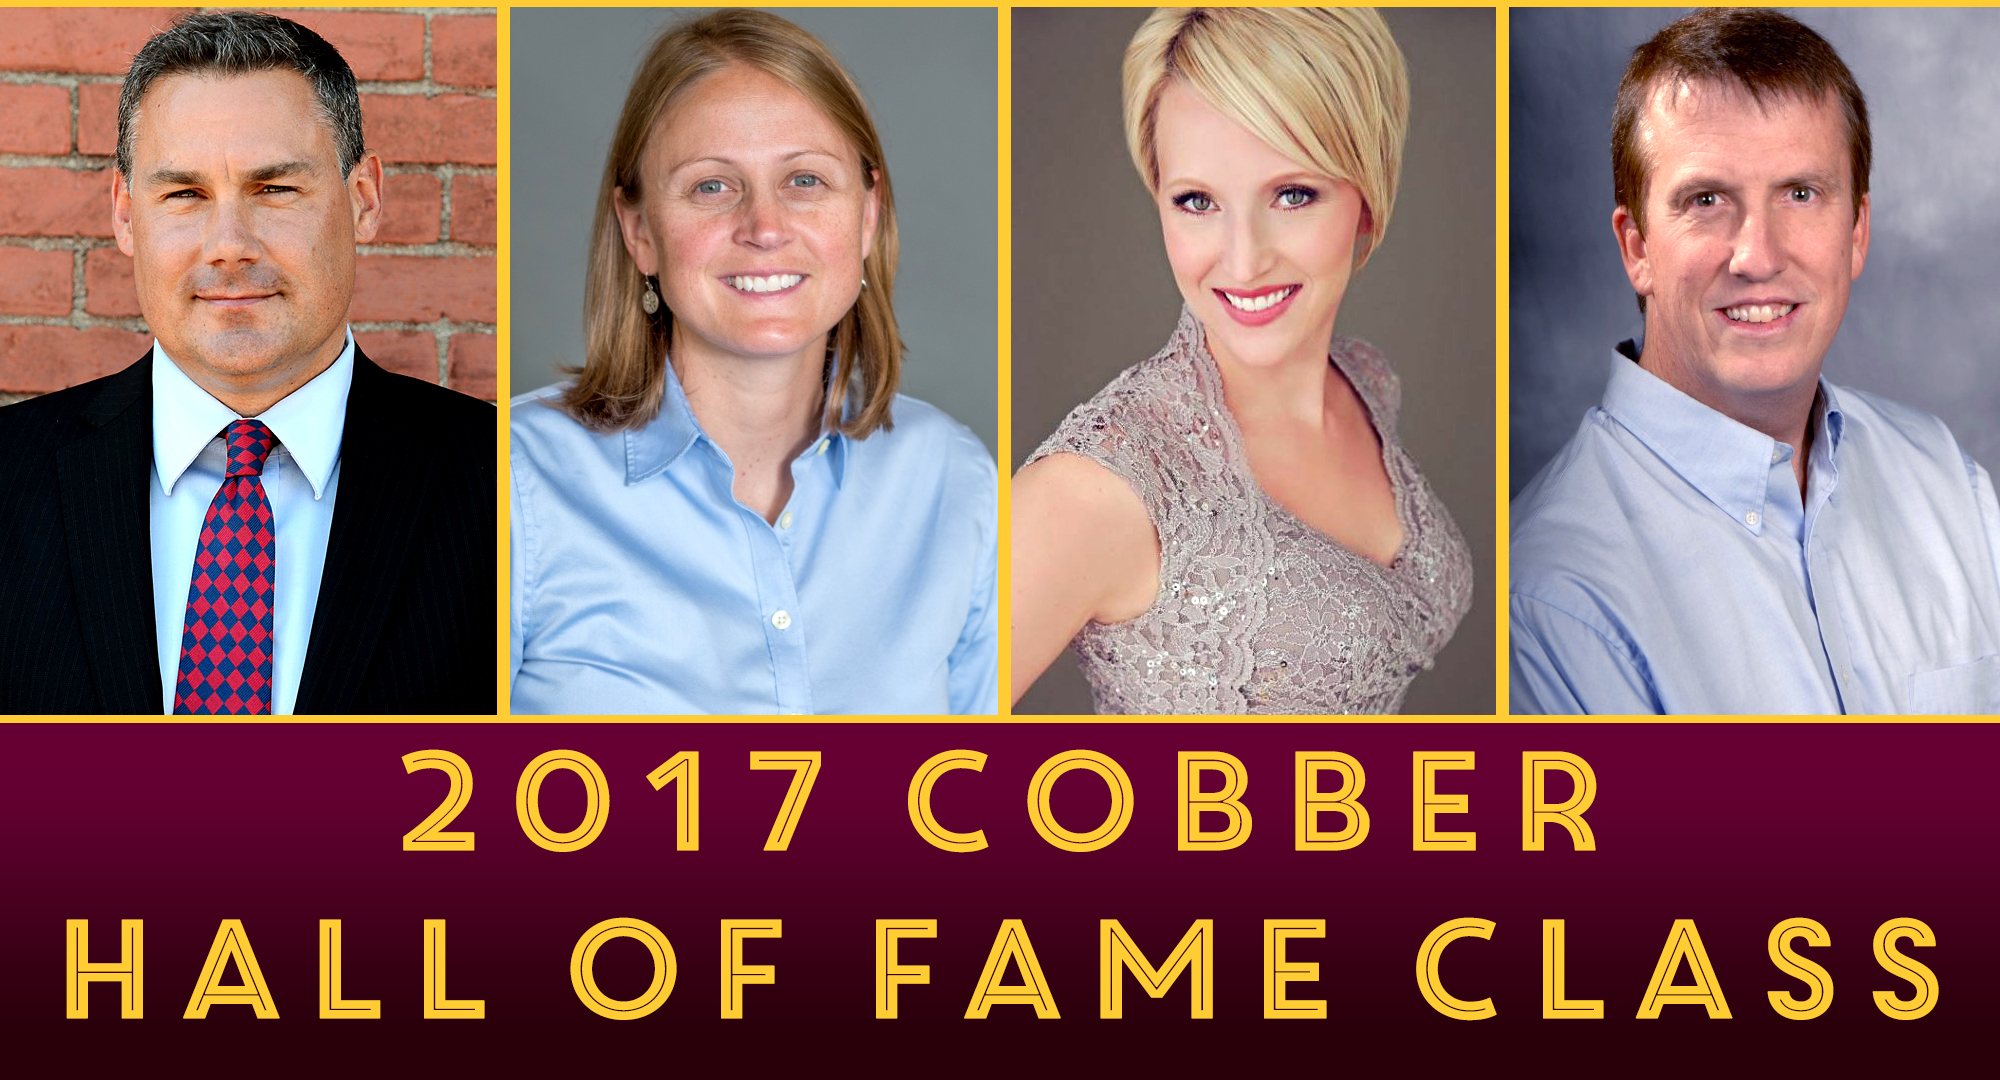 The 2017 Concordia Hall of Fame inductees are (L-R): Tory Langemo '97, Shana Letnes Erickson '01, Brandi (Myers) Rostad '02 and Jim Cella